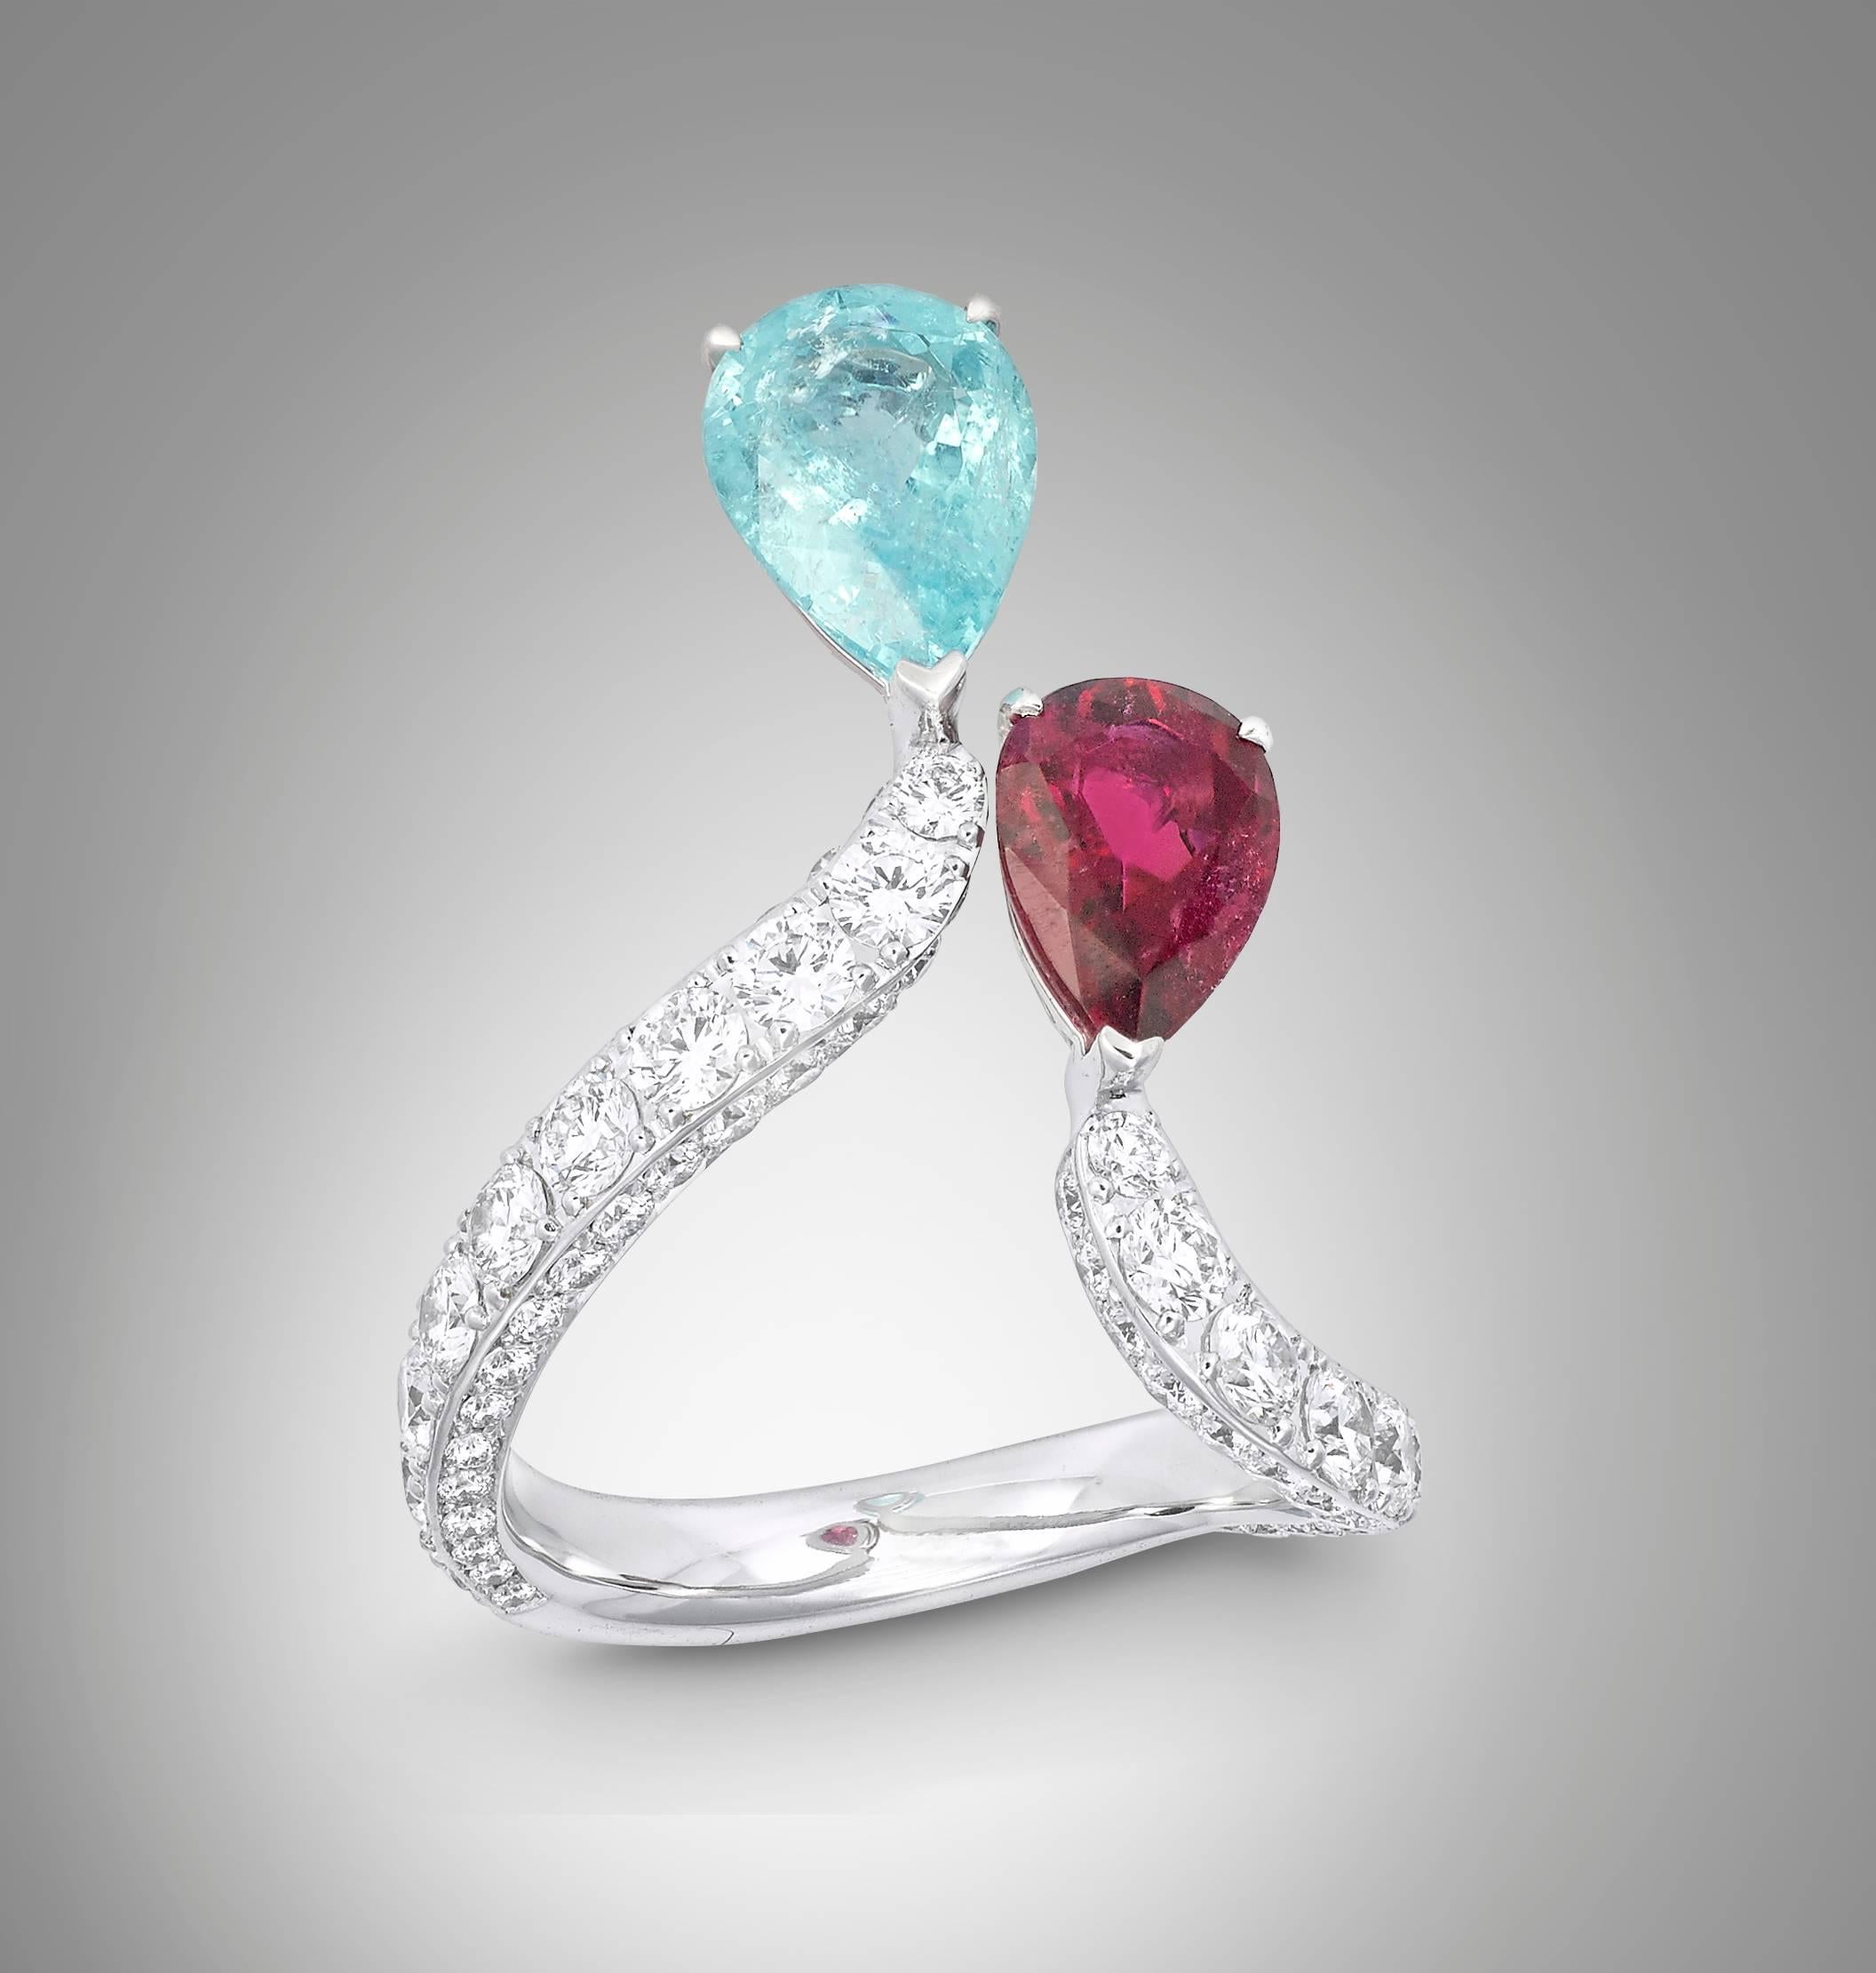 Toi et Moi ring crafted in 18K white gold                           
Round brilliant diamonds = 1.906 carats                                  
Pear shaped brazilian paraiba tourmaline = 1.8                       
Pear shape African rubelite         